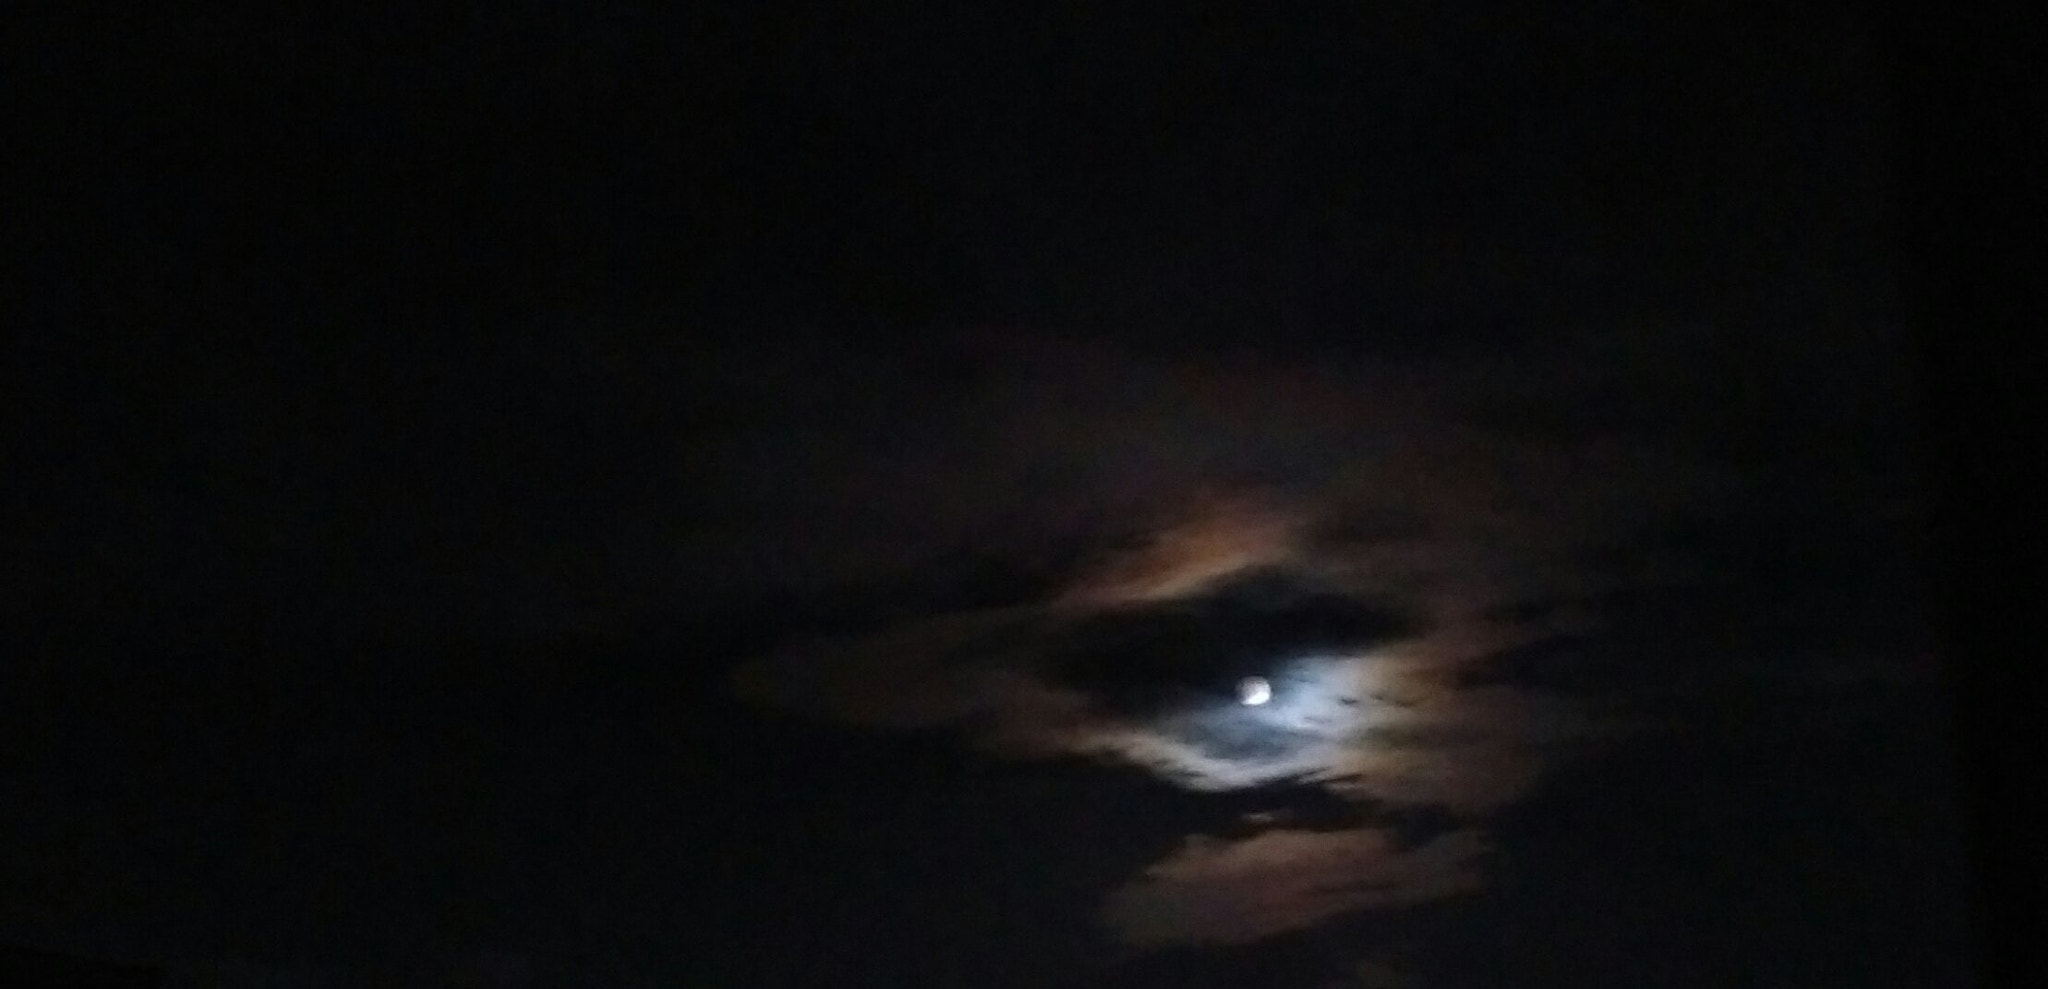 HTC ONE M8S sample photo. "strawberry moon" photography